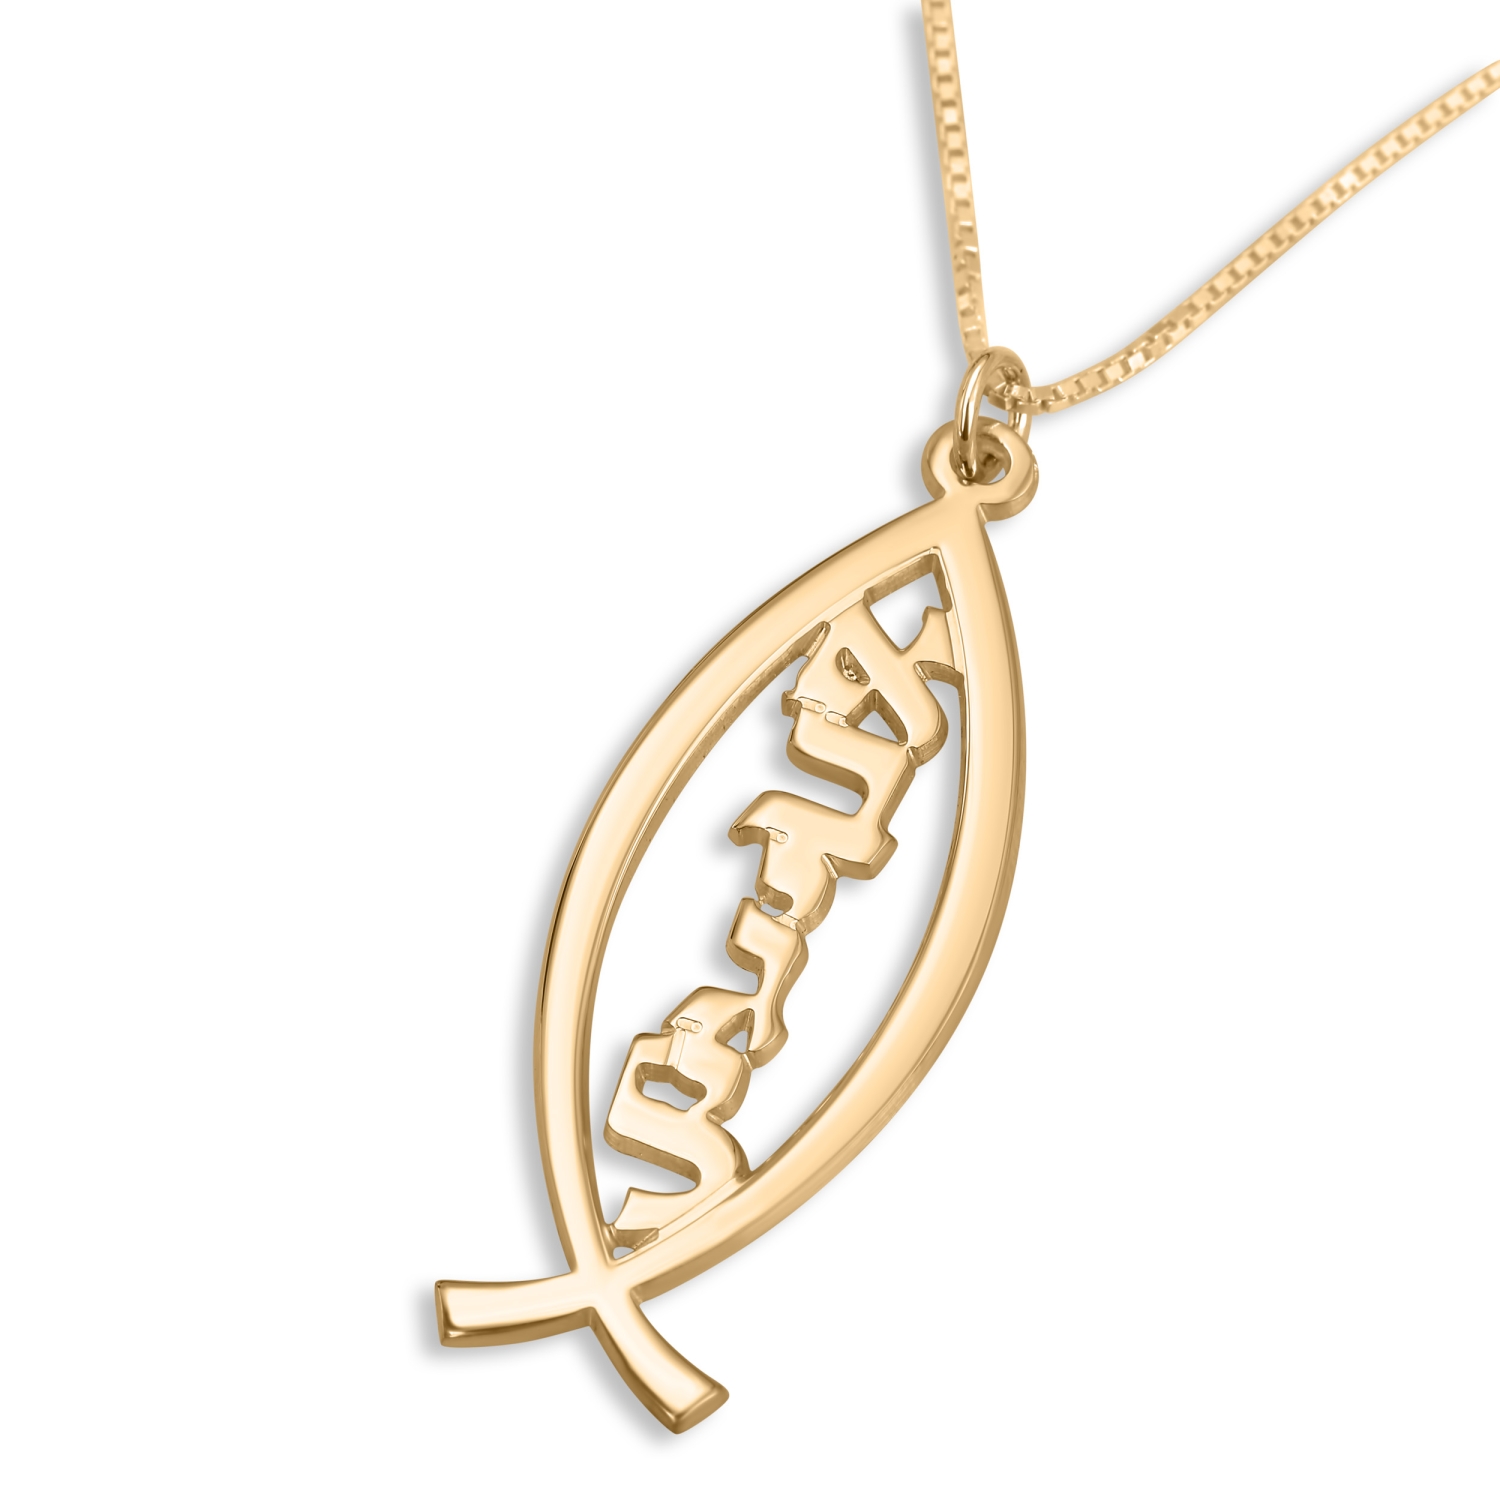 24K Gold Plated Personalized Ichthus Fish Hebrew Name Necklace - 1